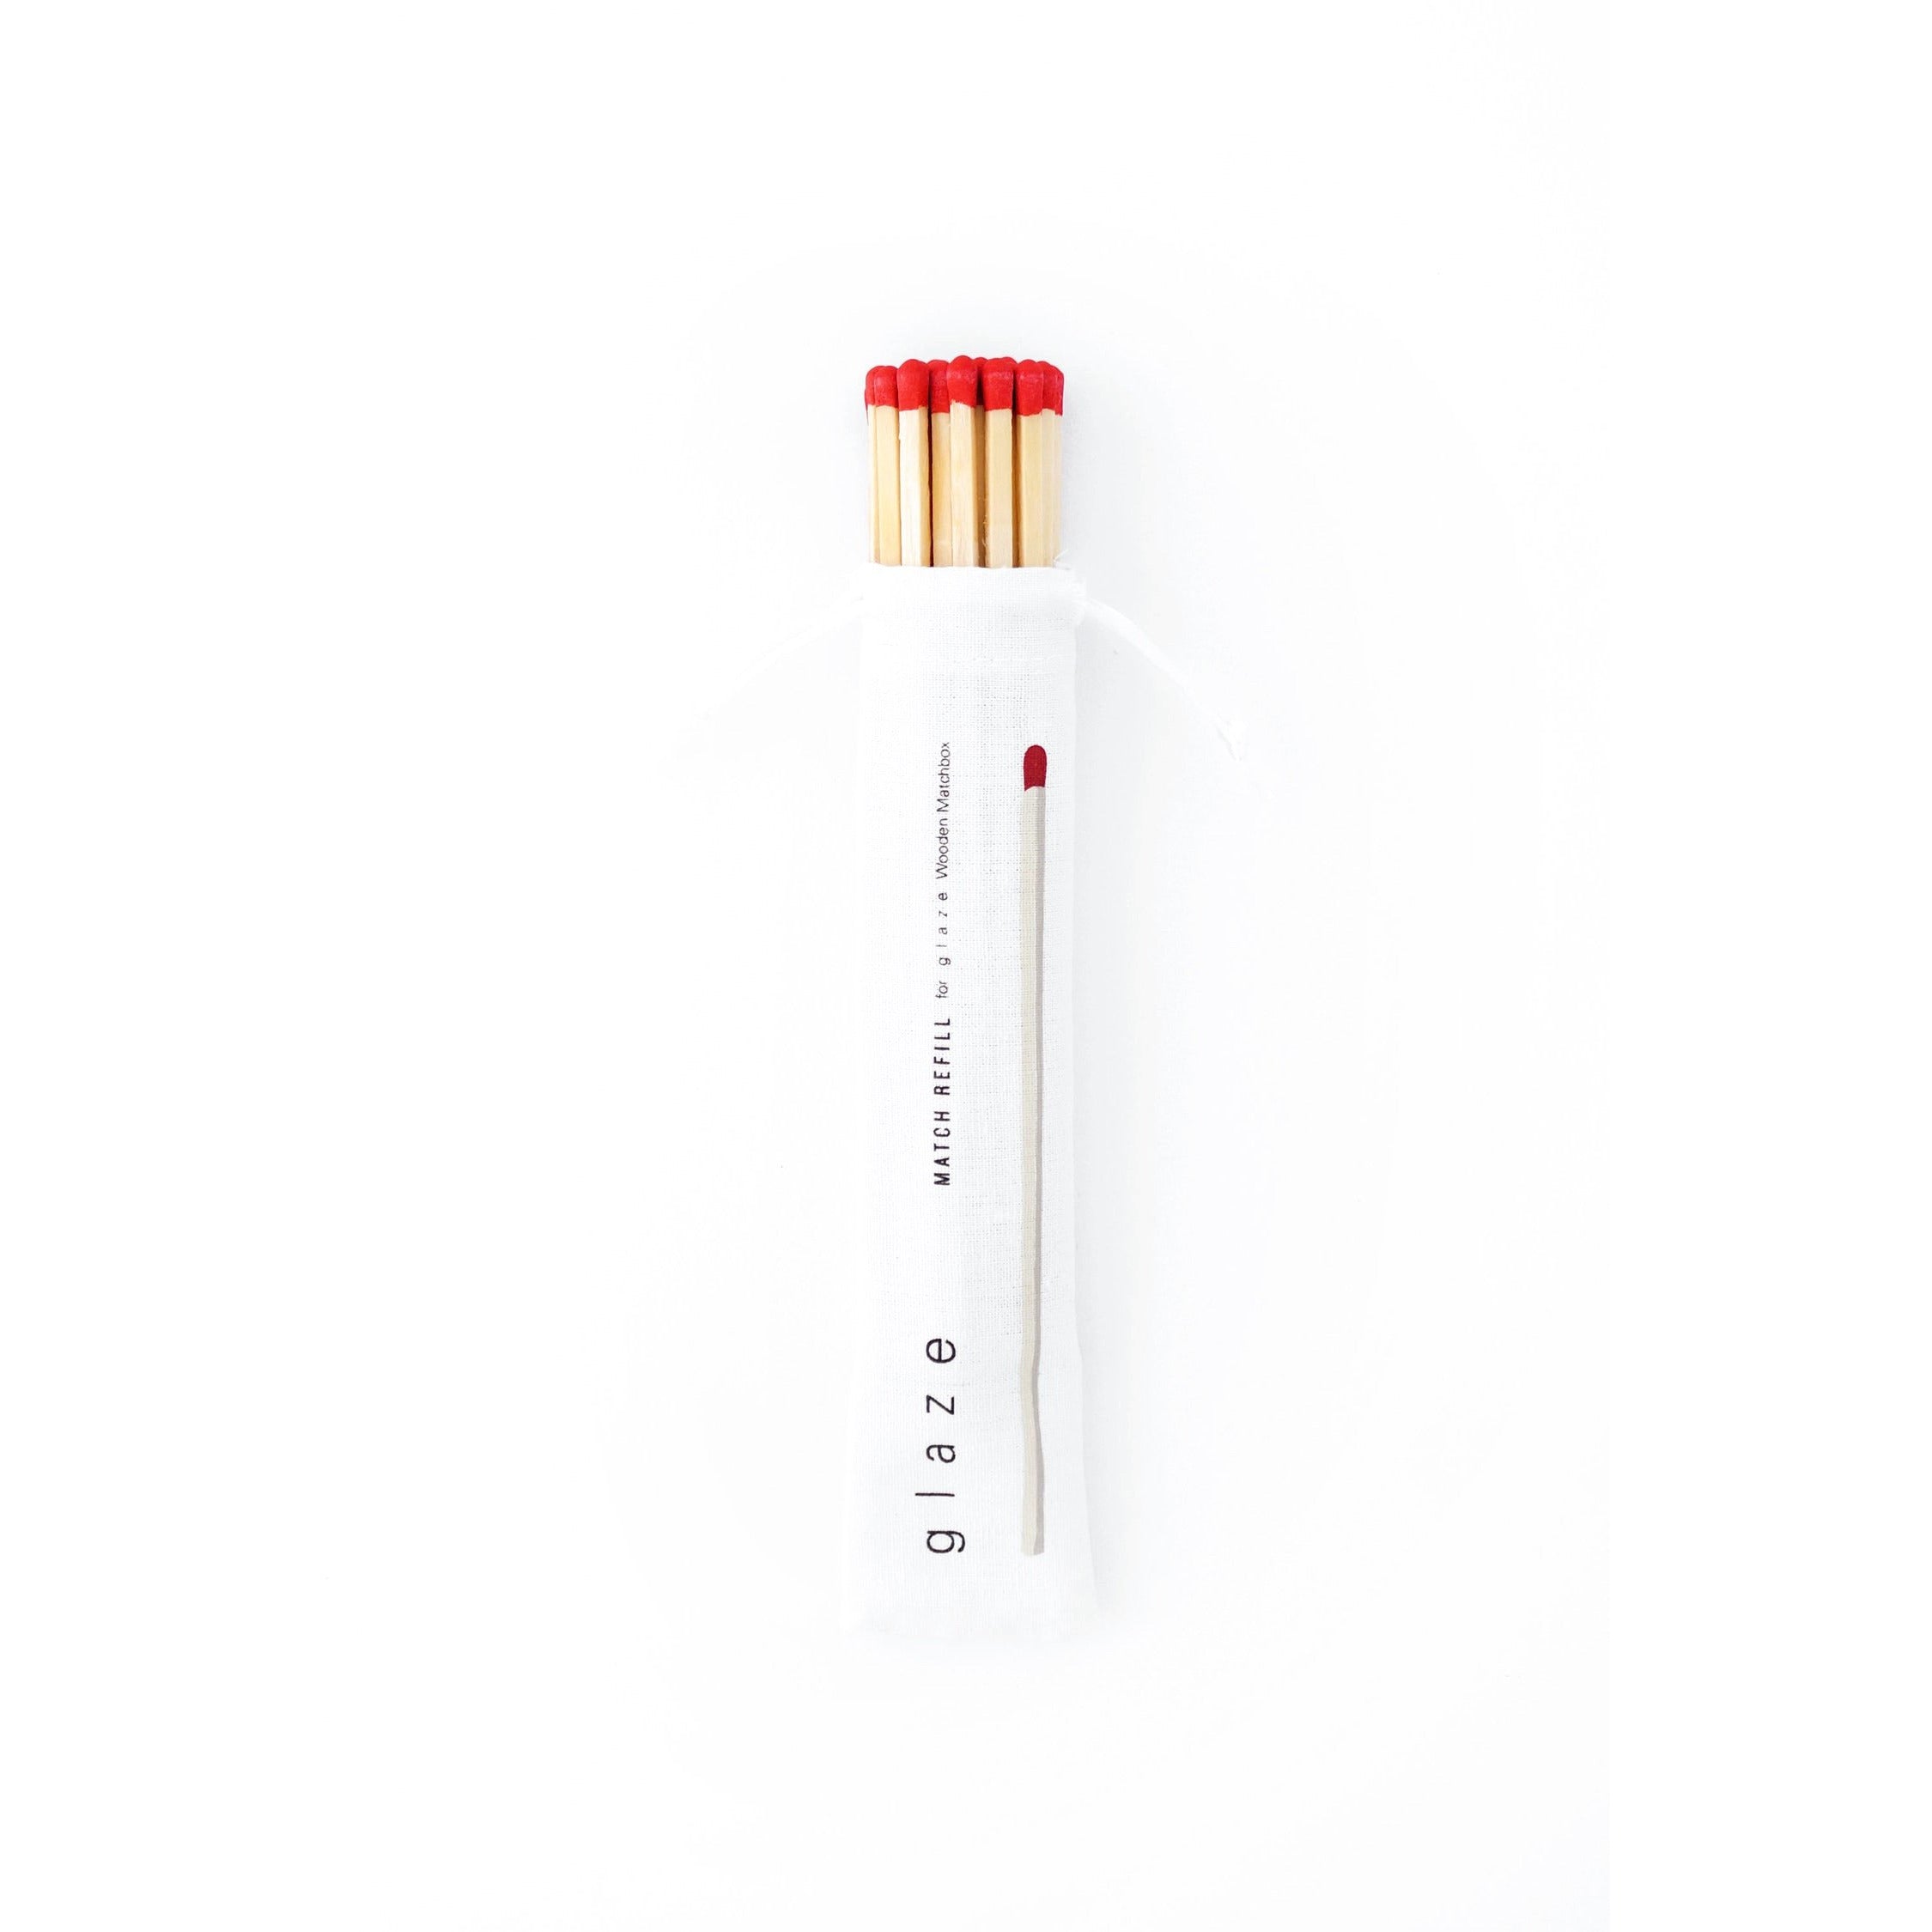 Match Refill Red Safety- Long